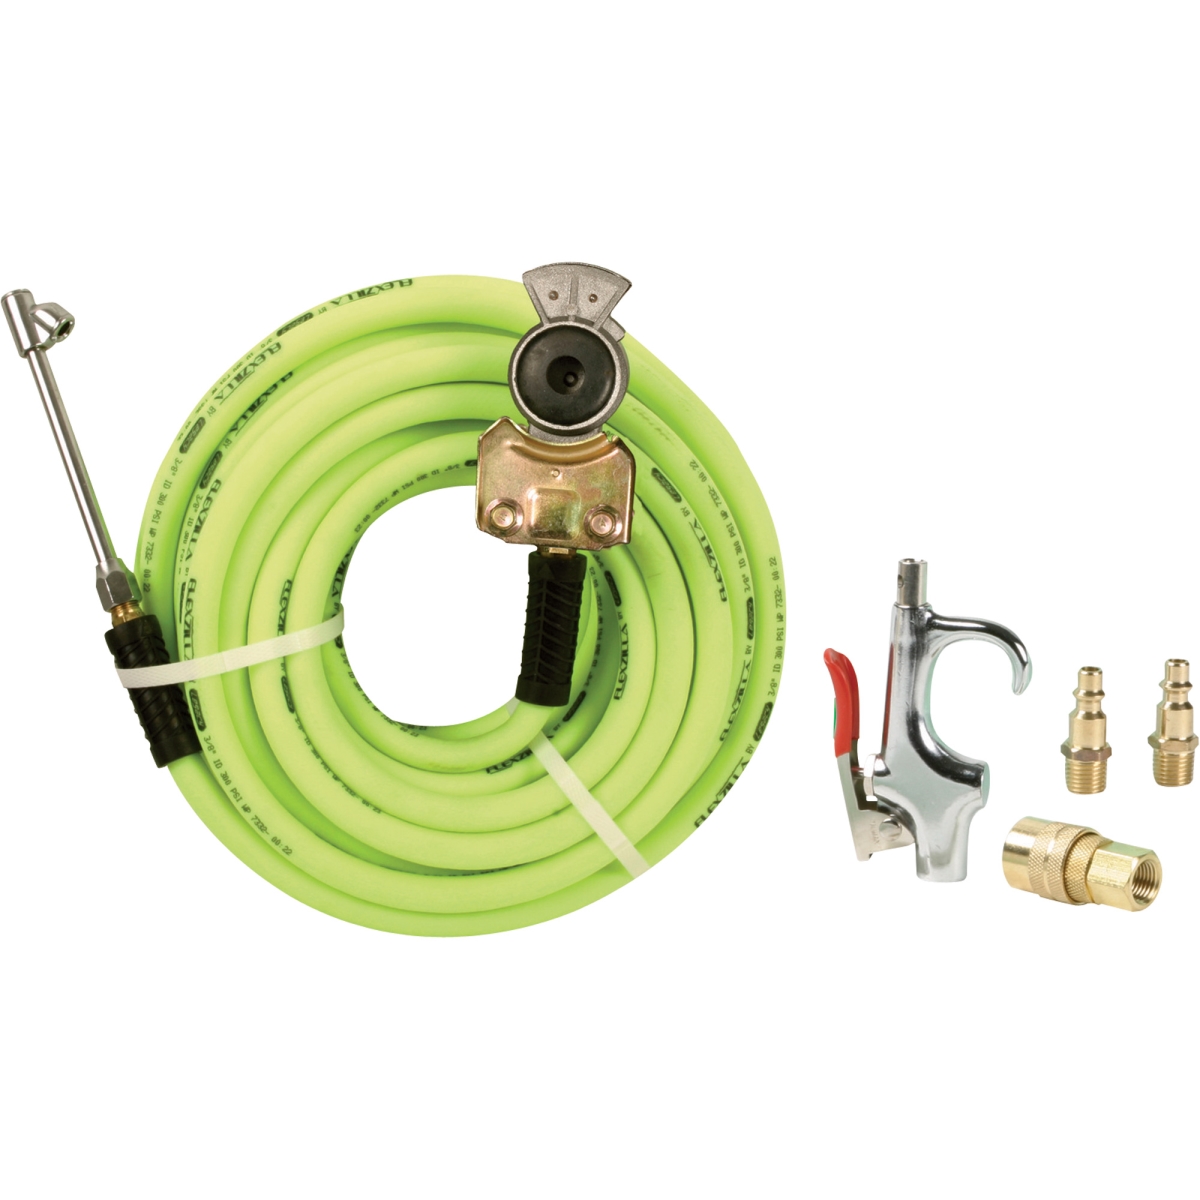 0.25 In. Tire Inflator With Flexilla Hose